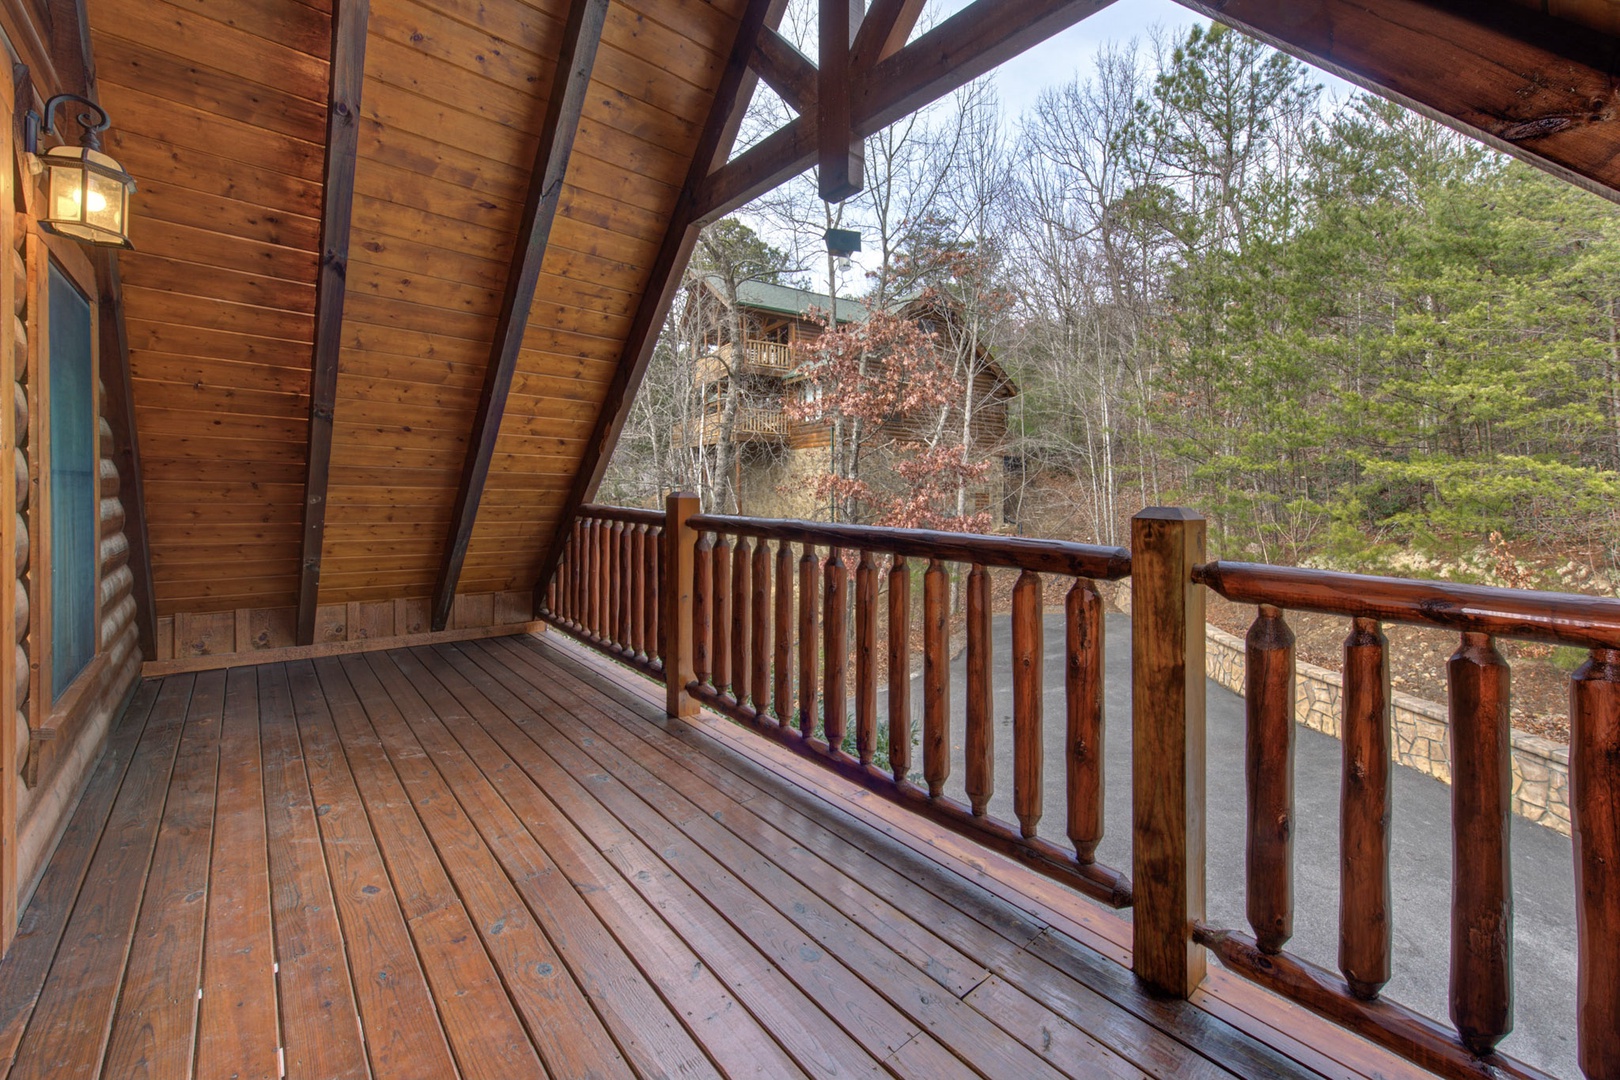 Breathtaking views await from every angle on the upper-level balcony